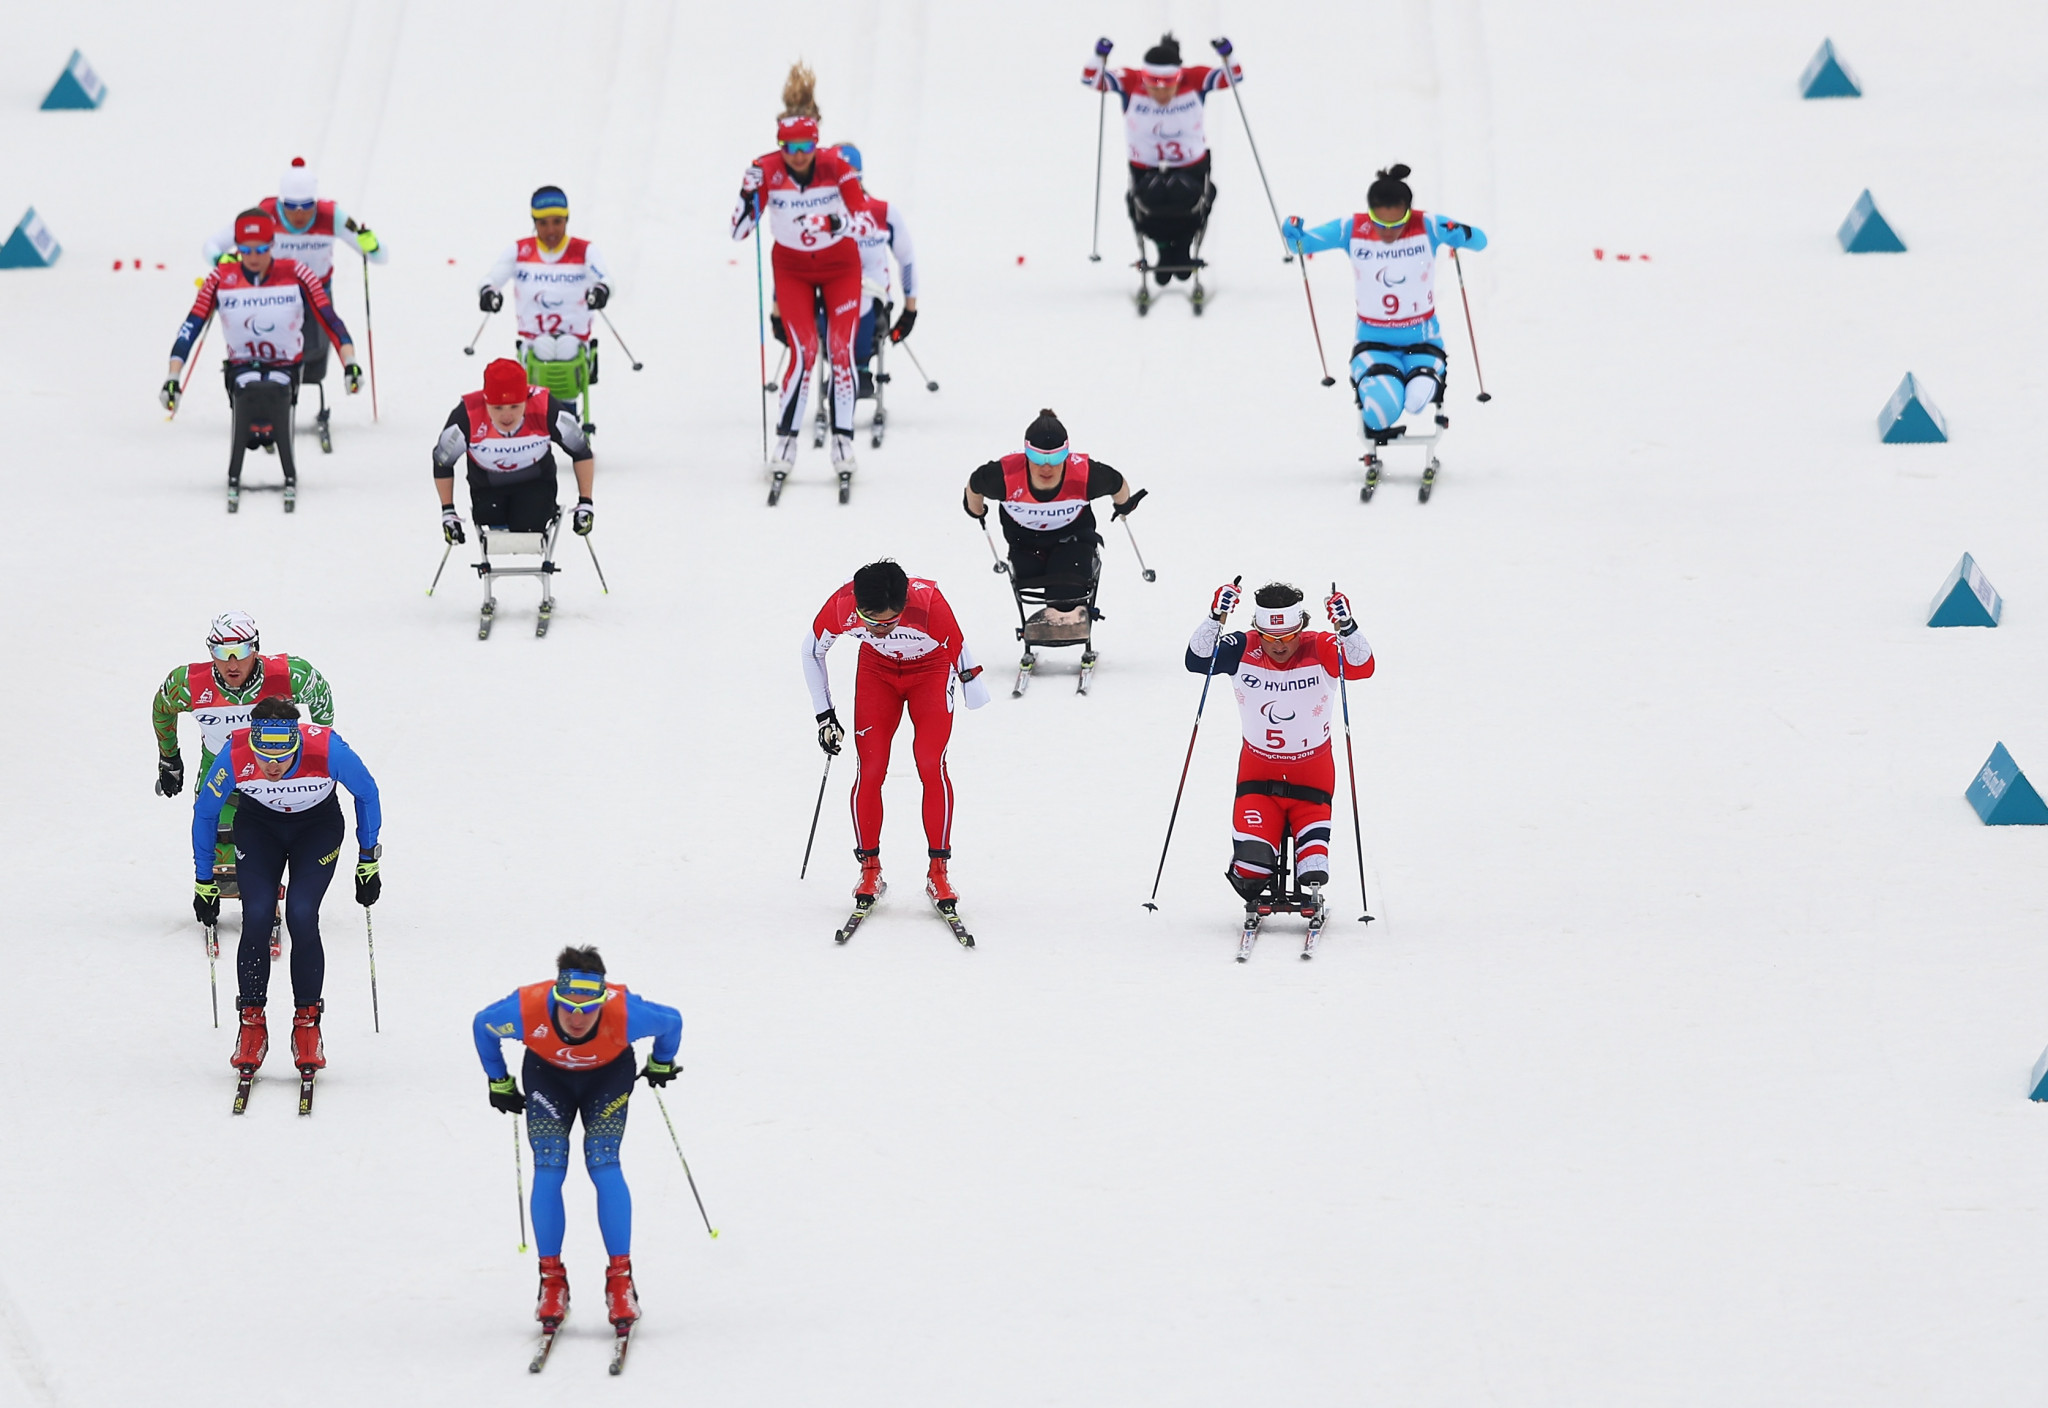  Mass start of the 4x2.5km mixed relay at the Alpensia Biathlon Centre ©Getty Images